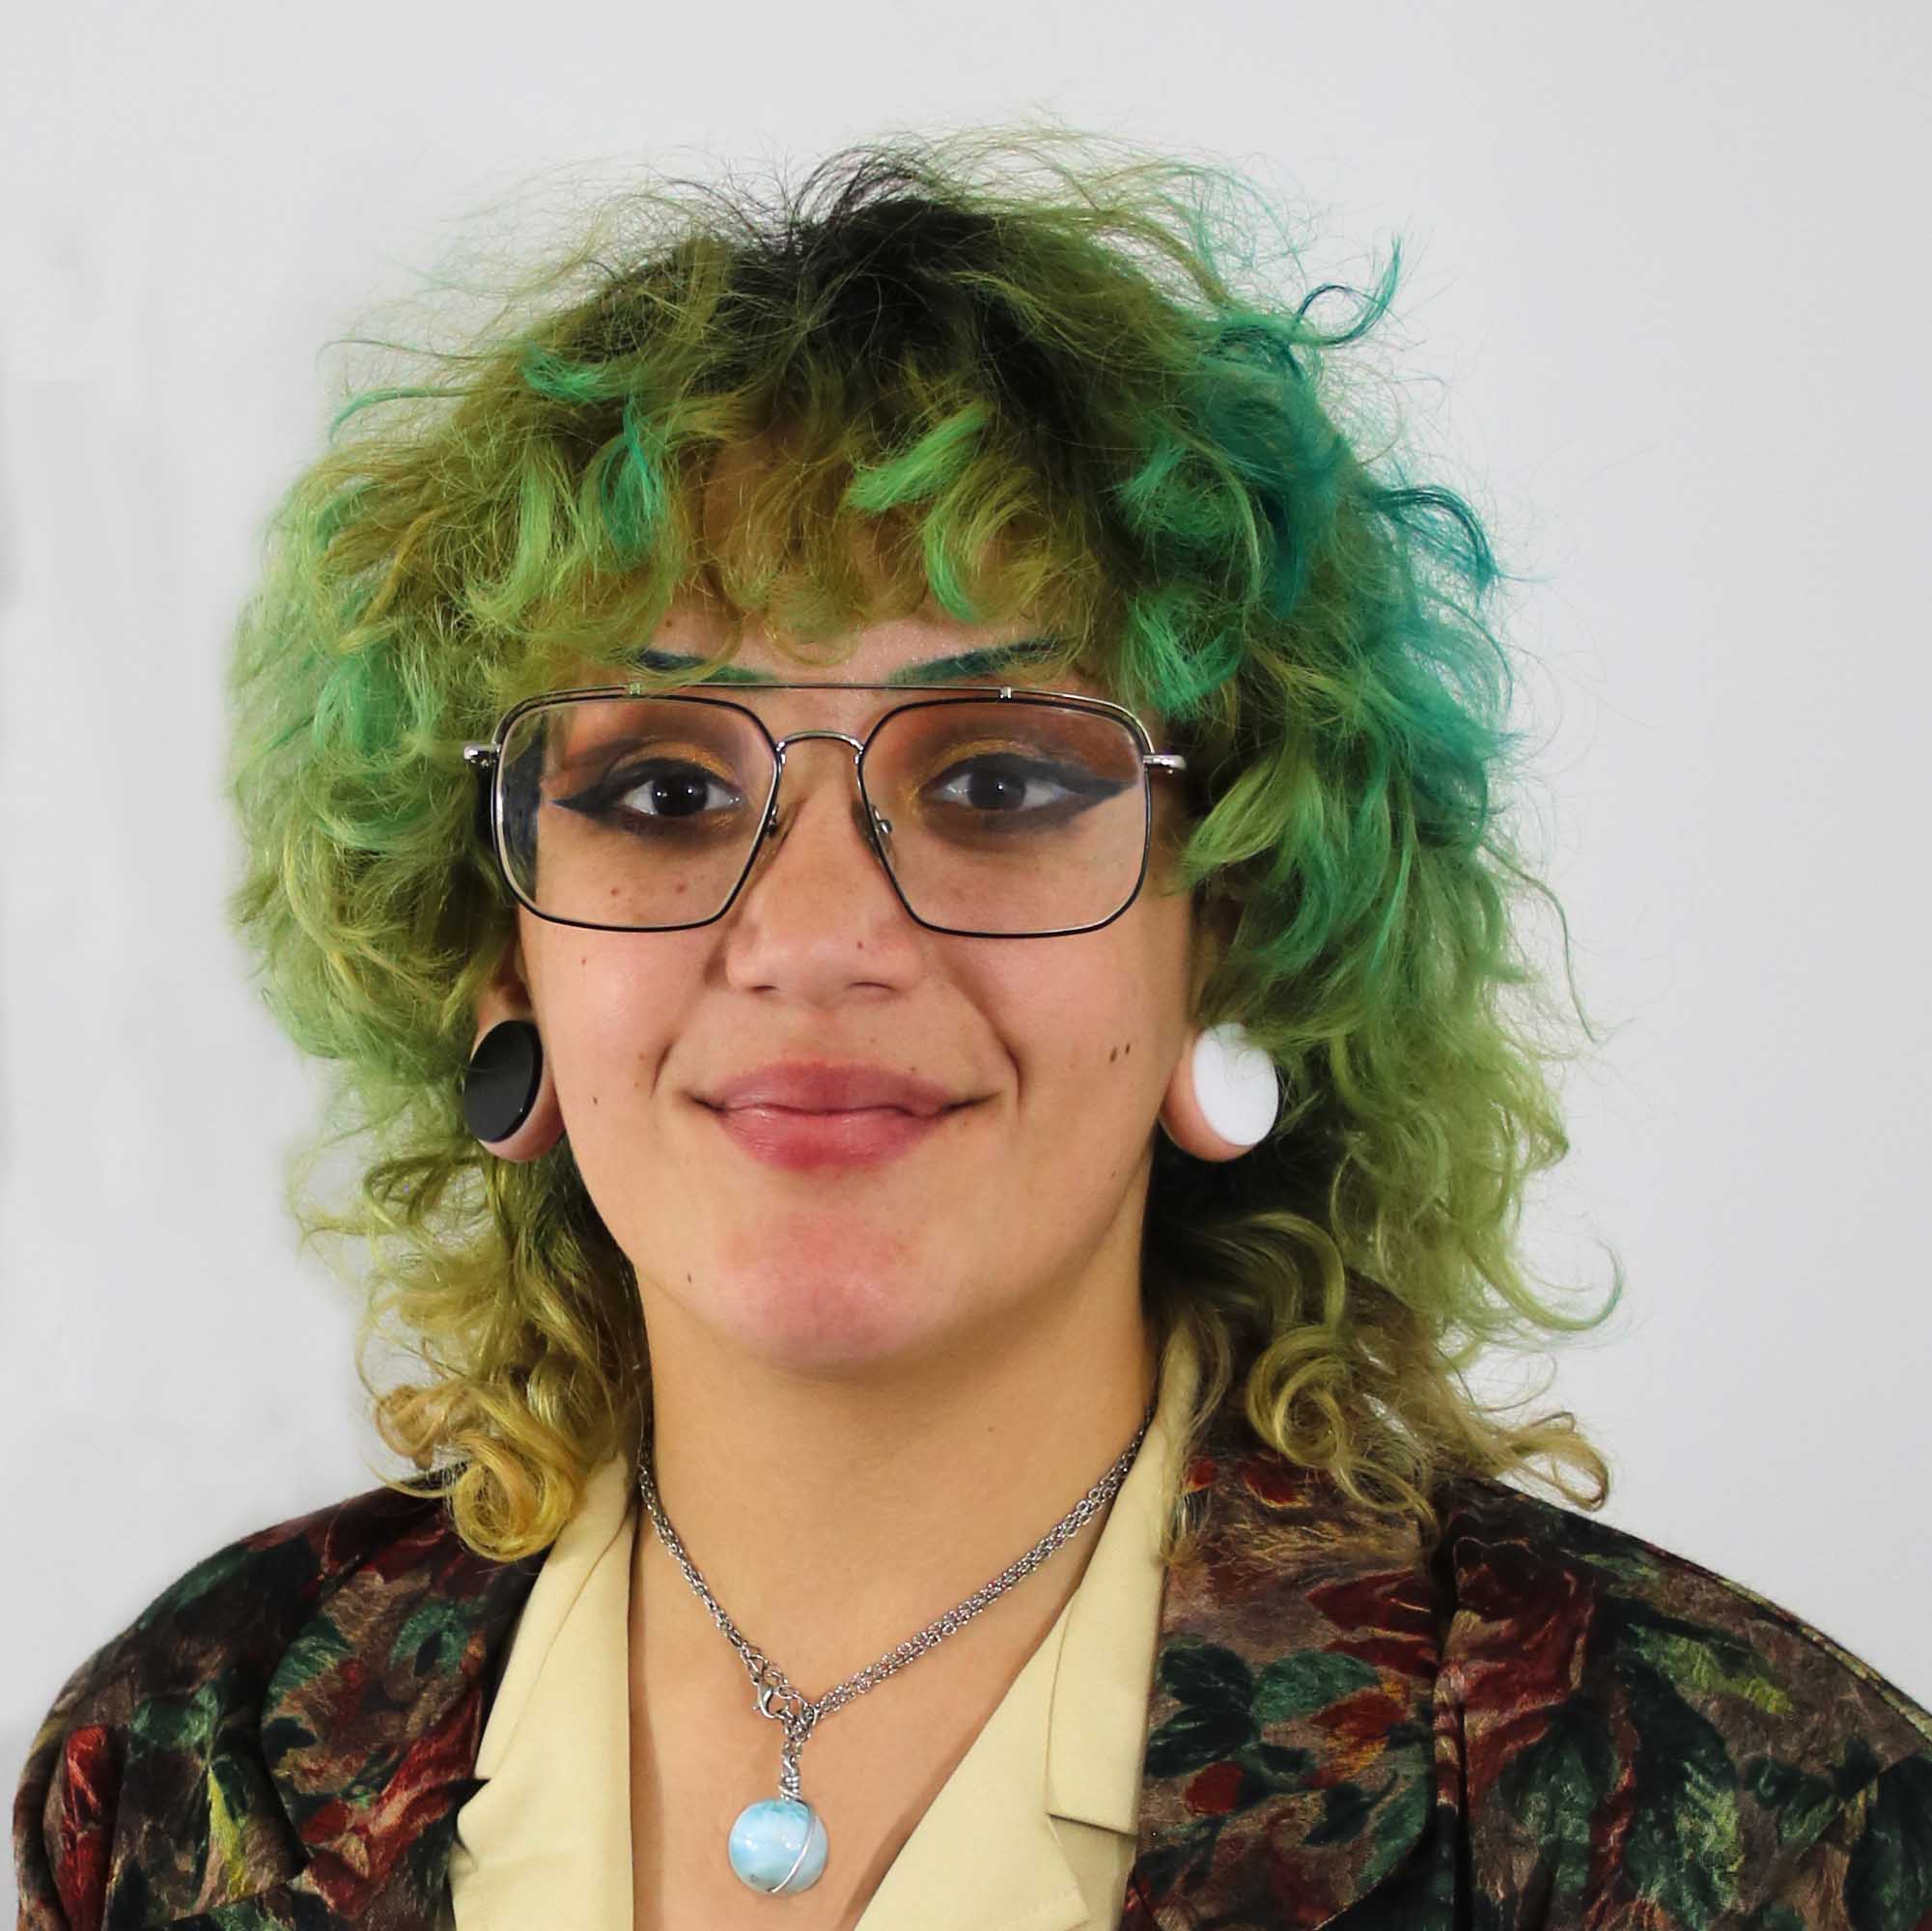 headshot of person with green hair and gauged ears